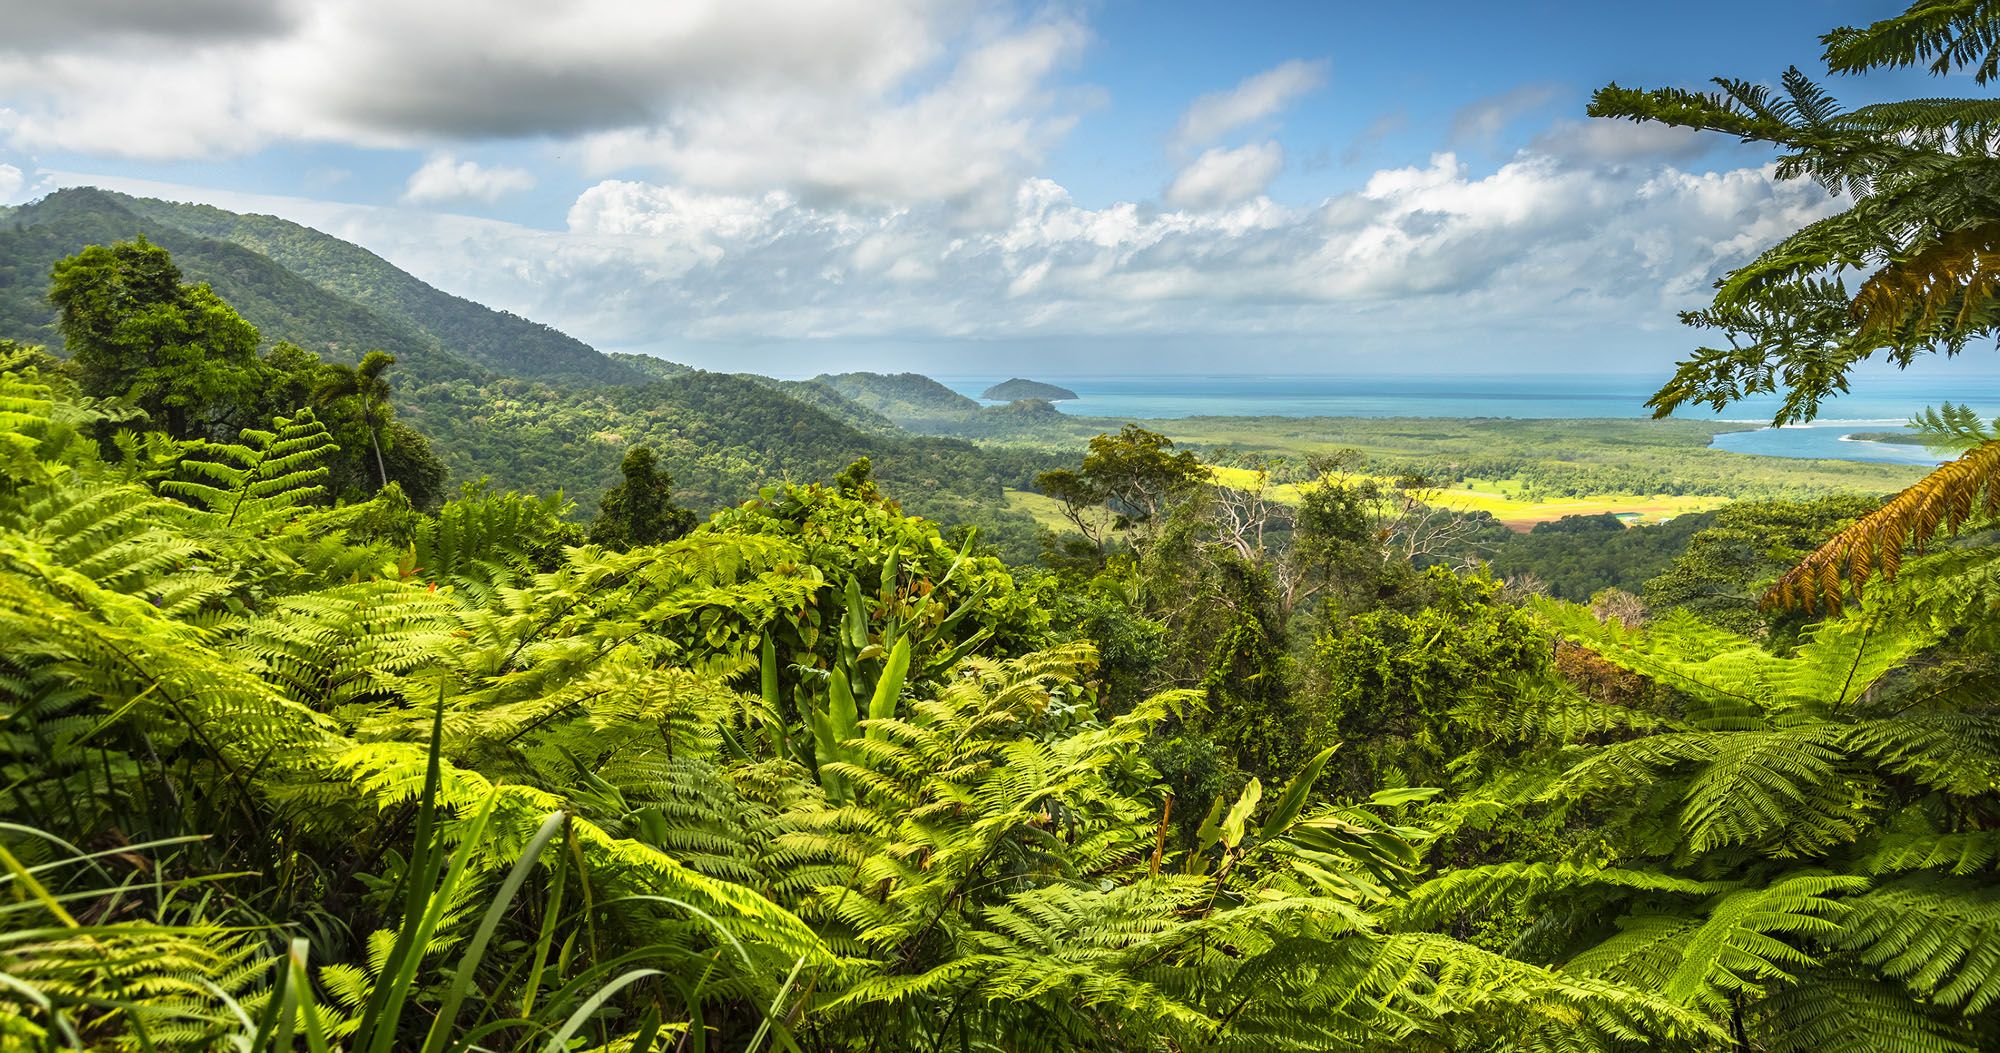 Featured image for “Daintree National Park: Things to Do, Best Tours & How to Get Here”